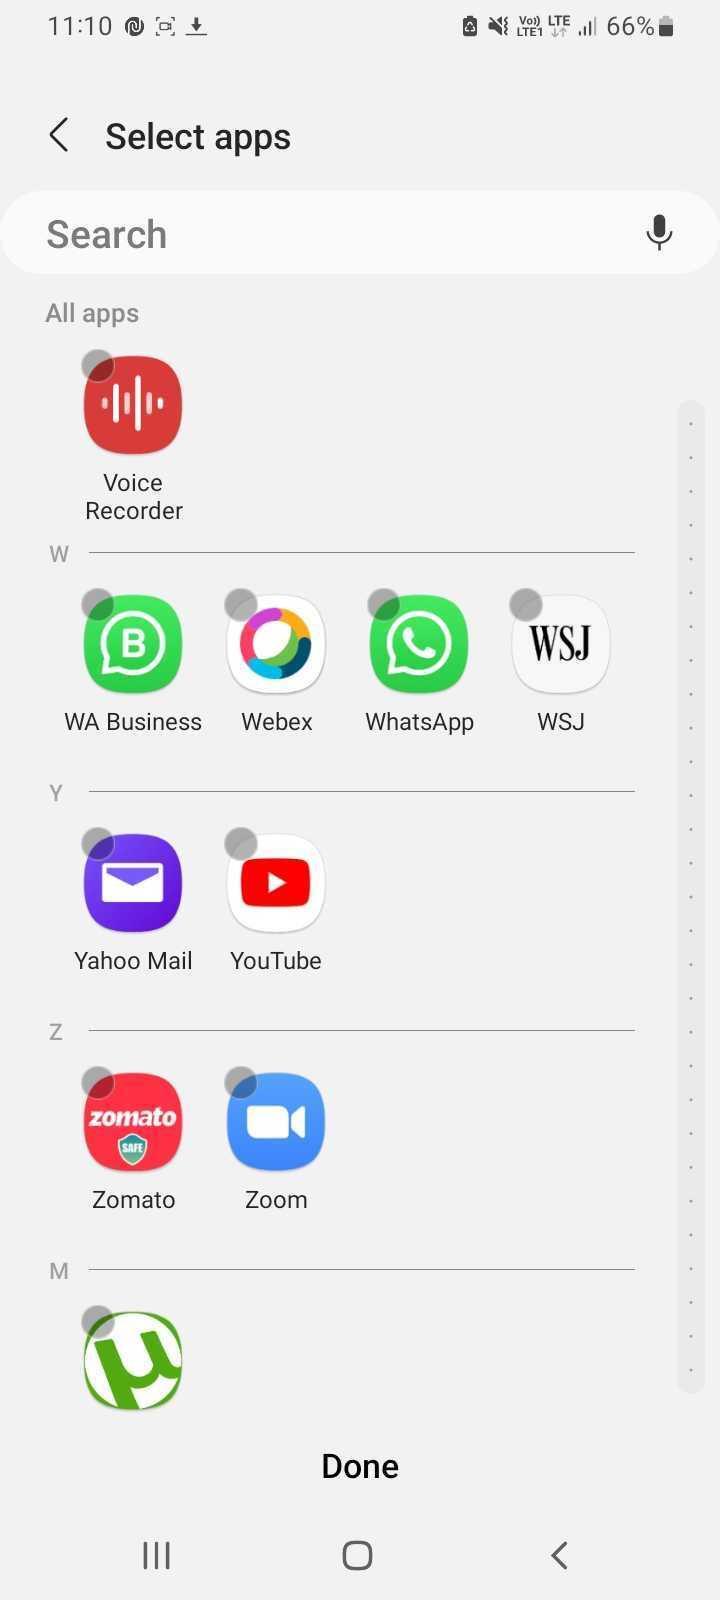 How to hide apps on Samsung devices- Select the apps you want to hide